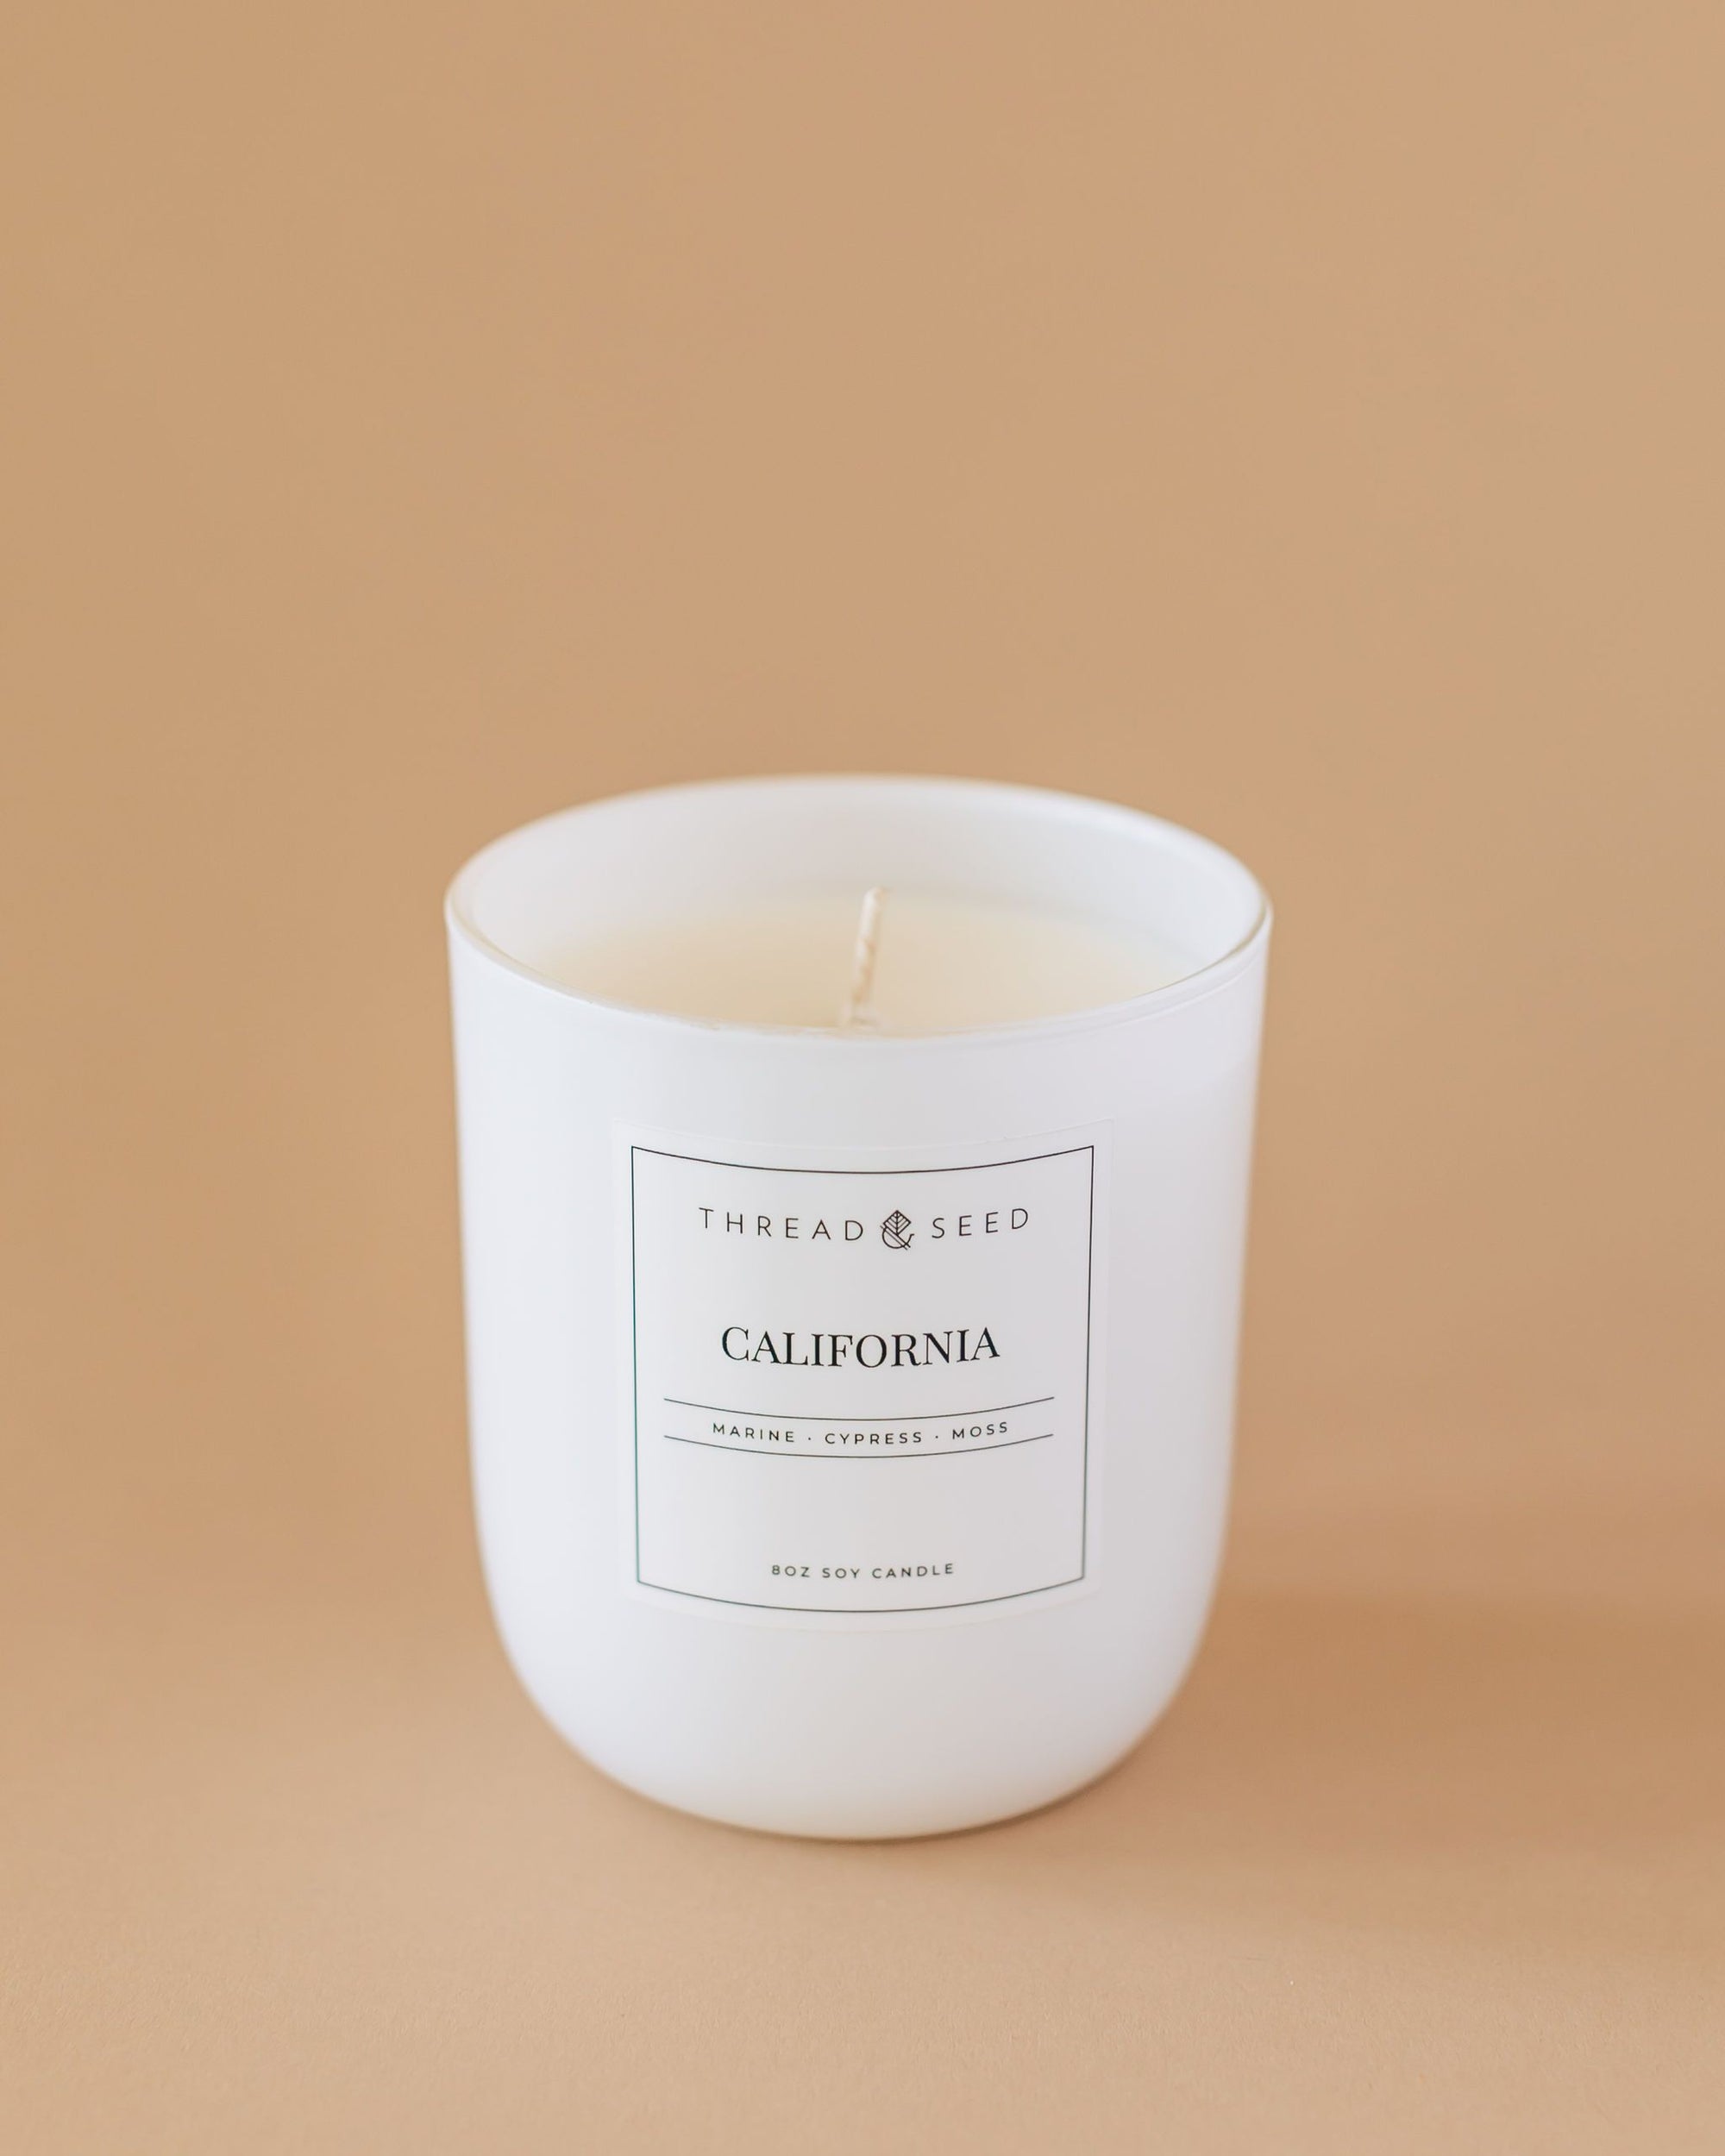 The California Soy Candle by Thread + Seed